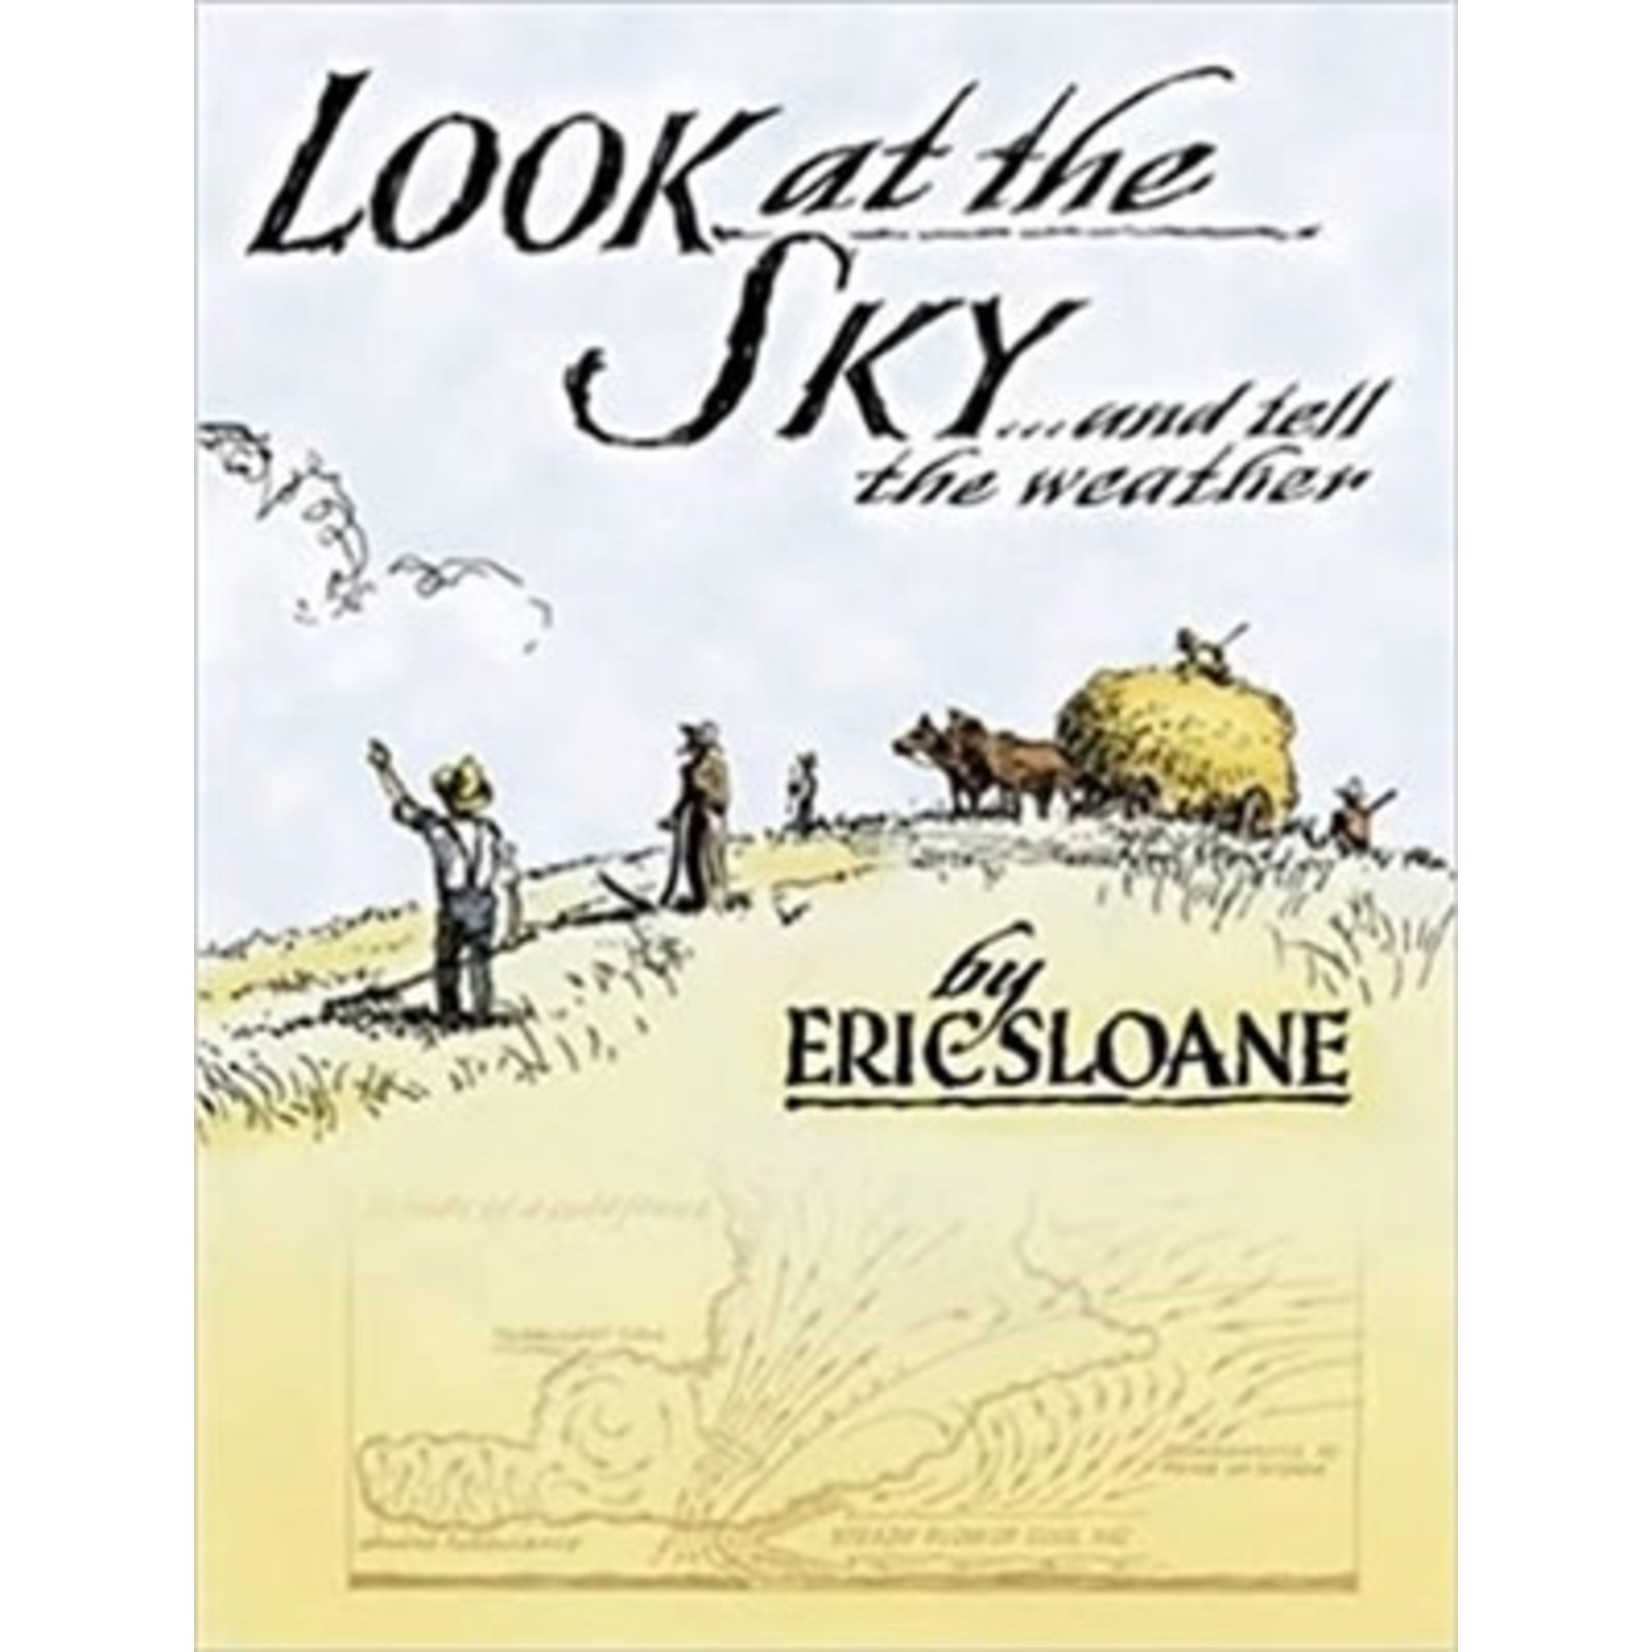 Look at the Sky and Tell the Weather by Eric Sloan